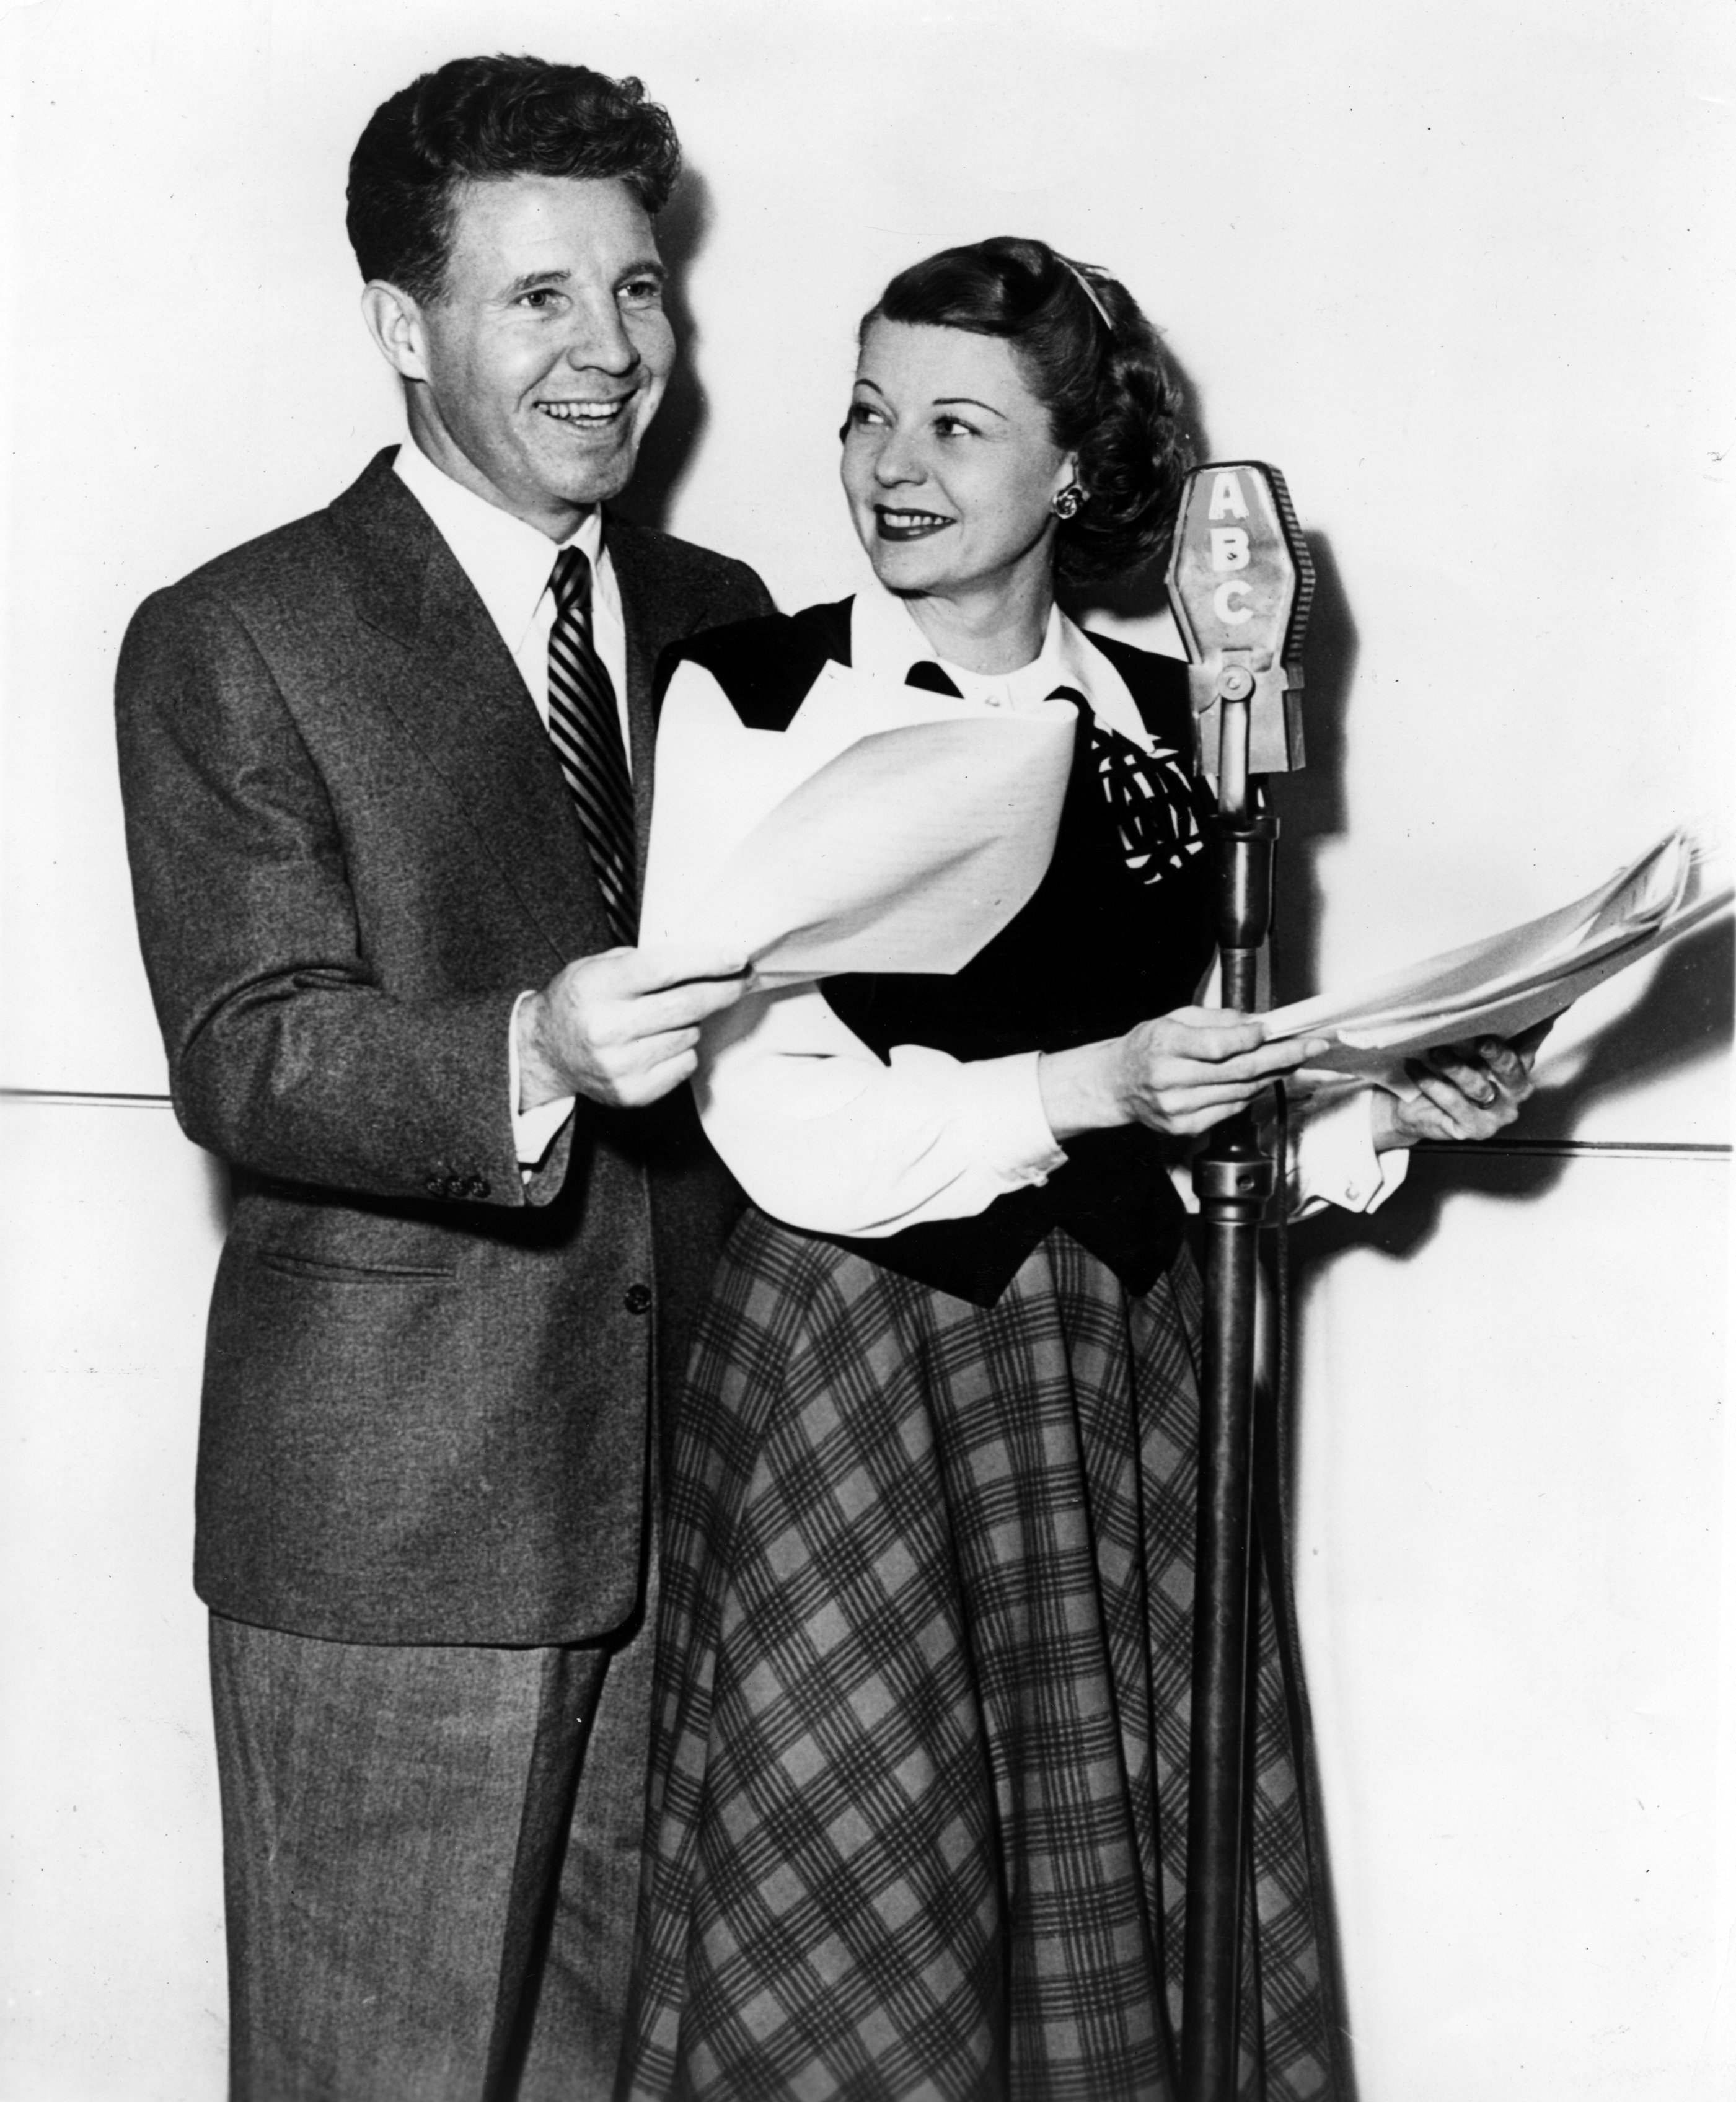 Ozzie Nelson and Harriet Nelson read a script at an ABC microphone in circa 1955. | Source: Michael Ochs Archives/Getty Images